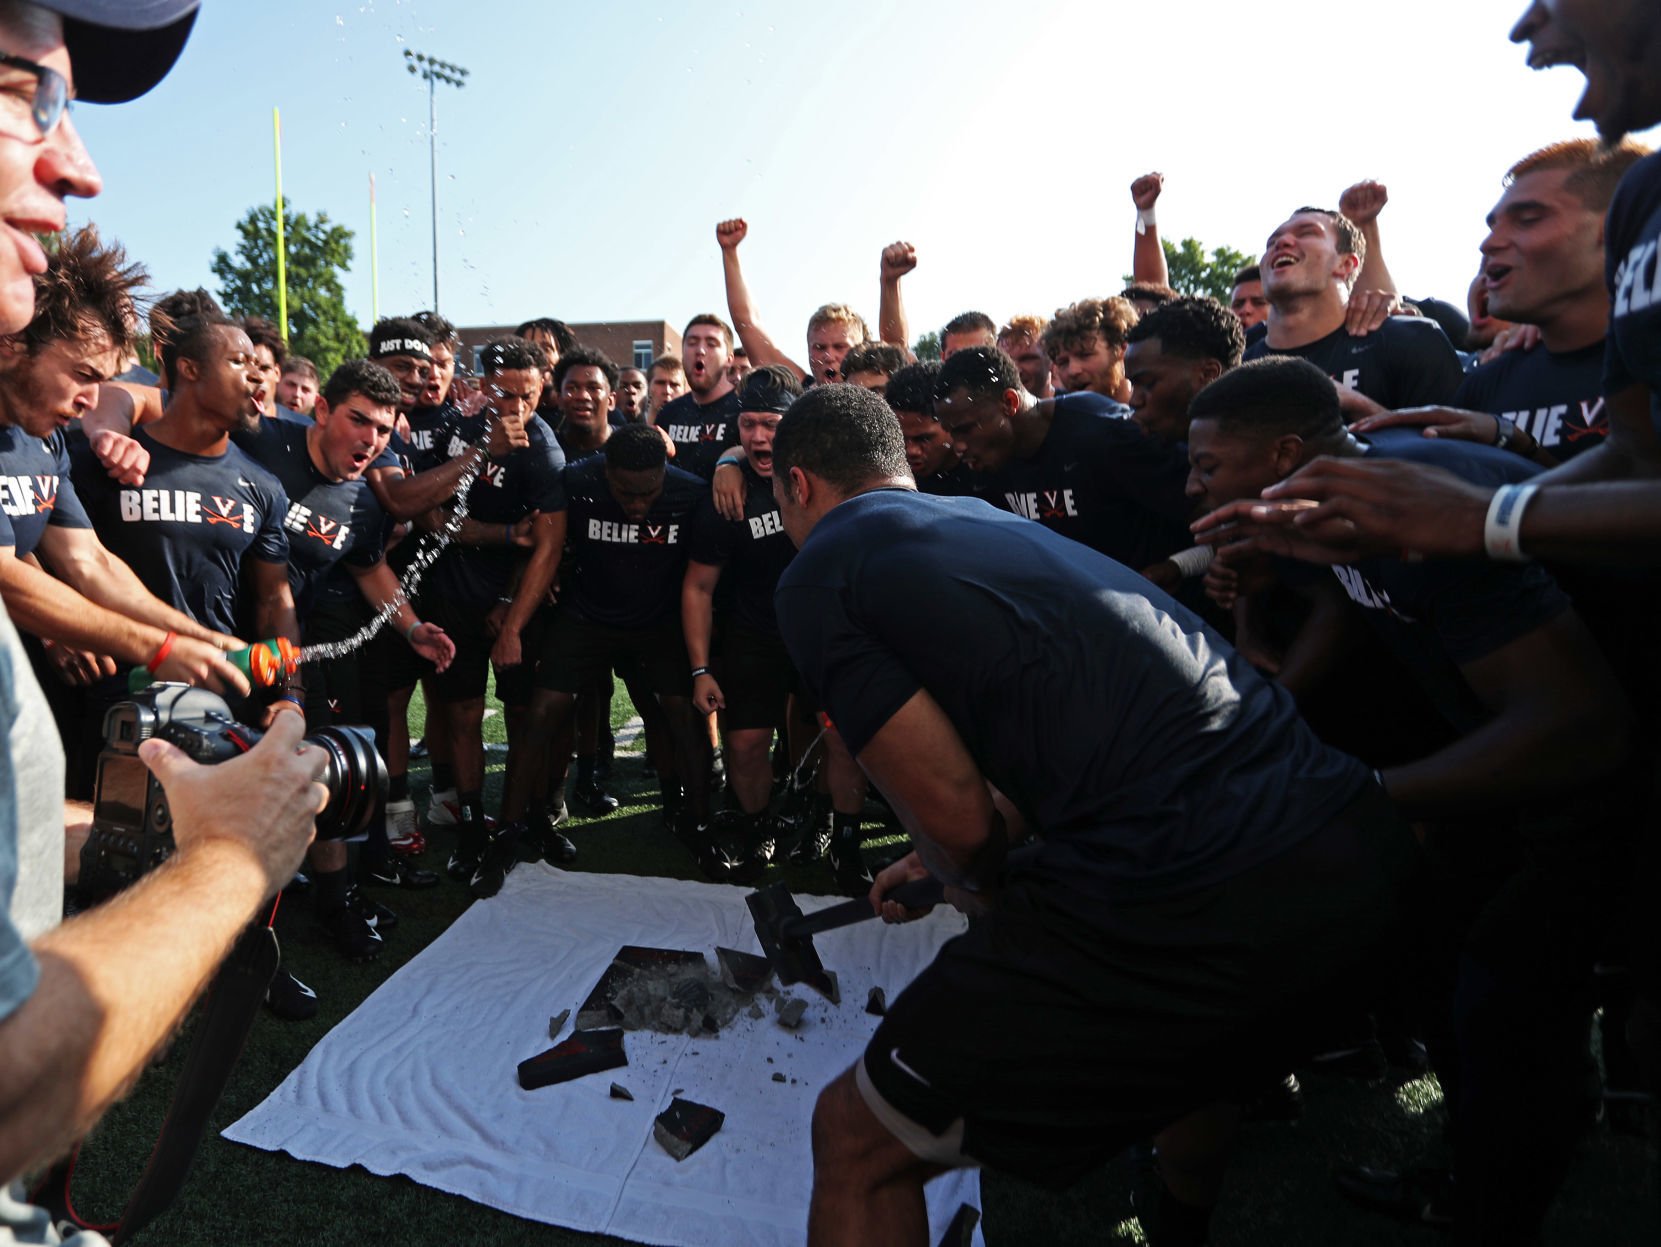 UVA football ends summer practices with a one-word motto: 'Believe 